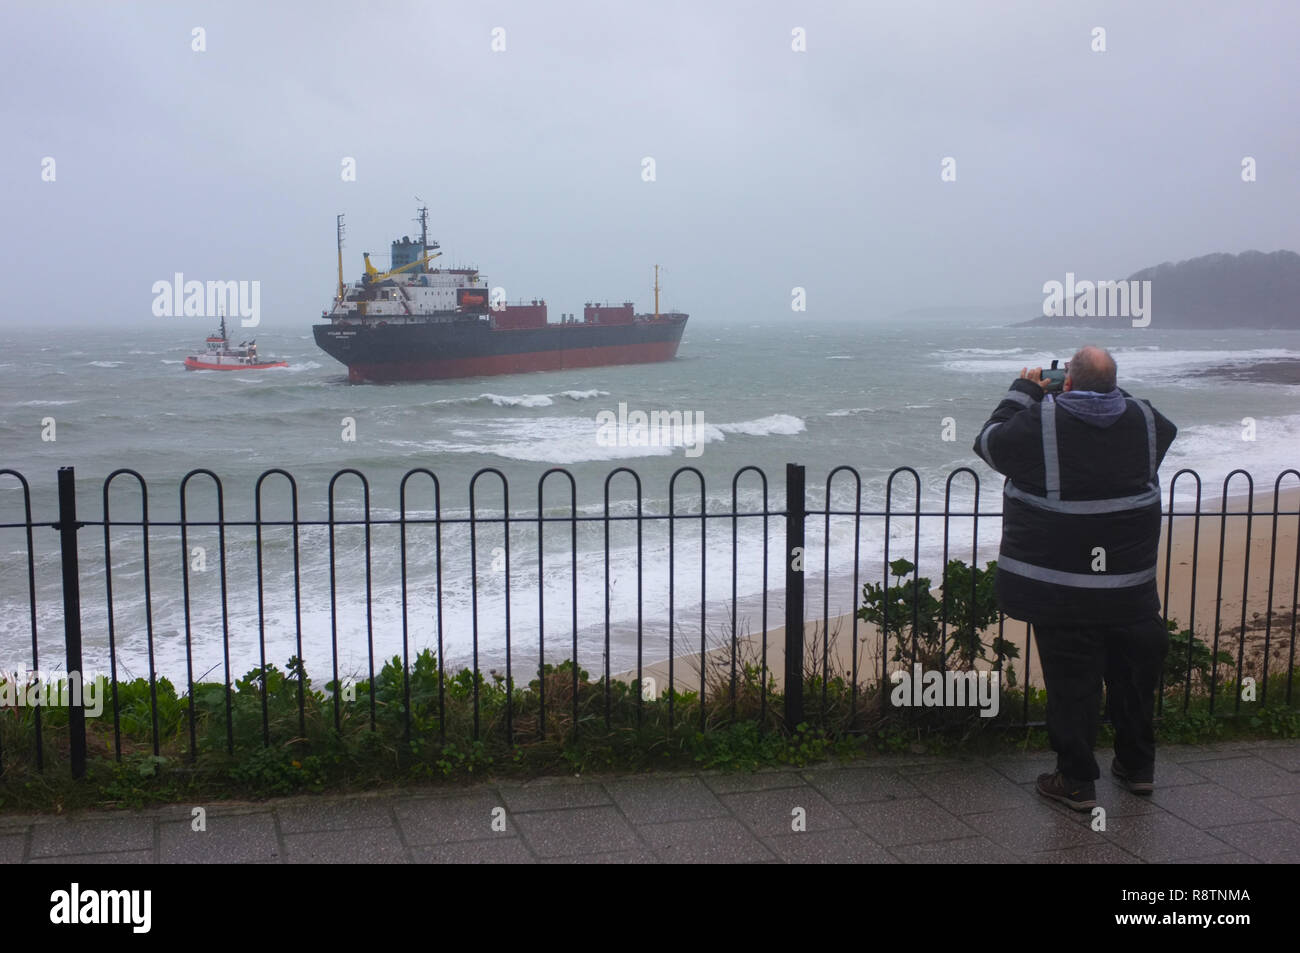 Falmouth, Cornwall, UK. 18th Dec, 2018. The Kuzma Minin bulk carrier ship sits aground on Gyllyngvase Beach with 18 Russian crew members on board waiting for a rescue from the Coast Guard. Strong winds blew the vessel aground at approximately 5:40am. Credit: Stephen Parker/Alamy Live News Stock Photo